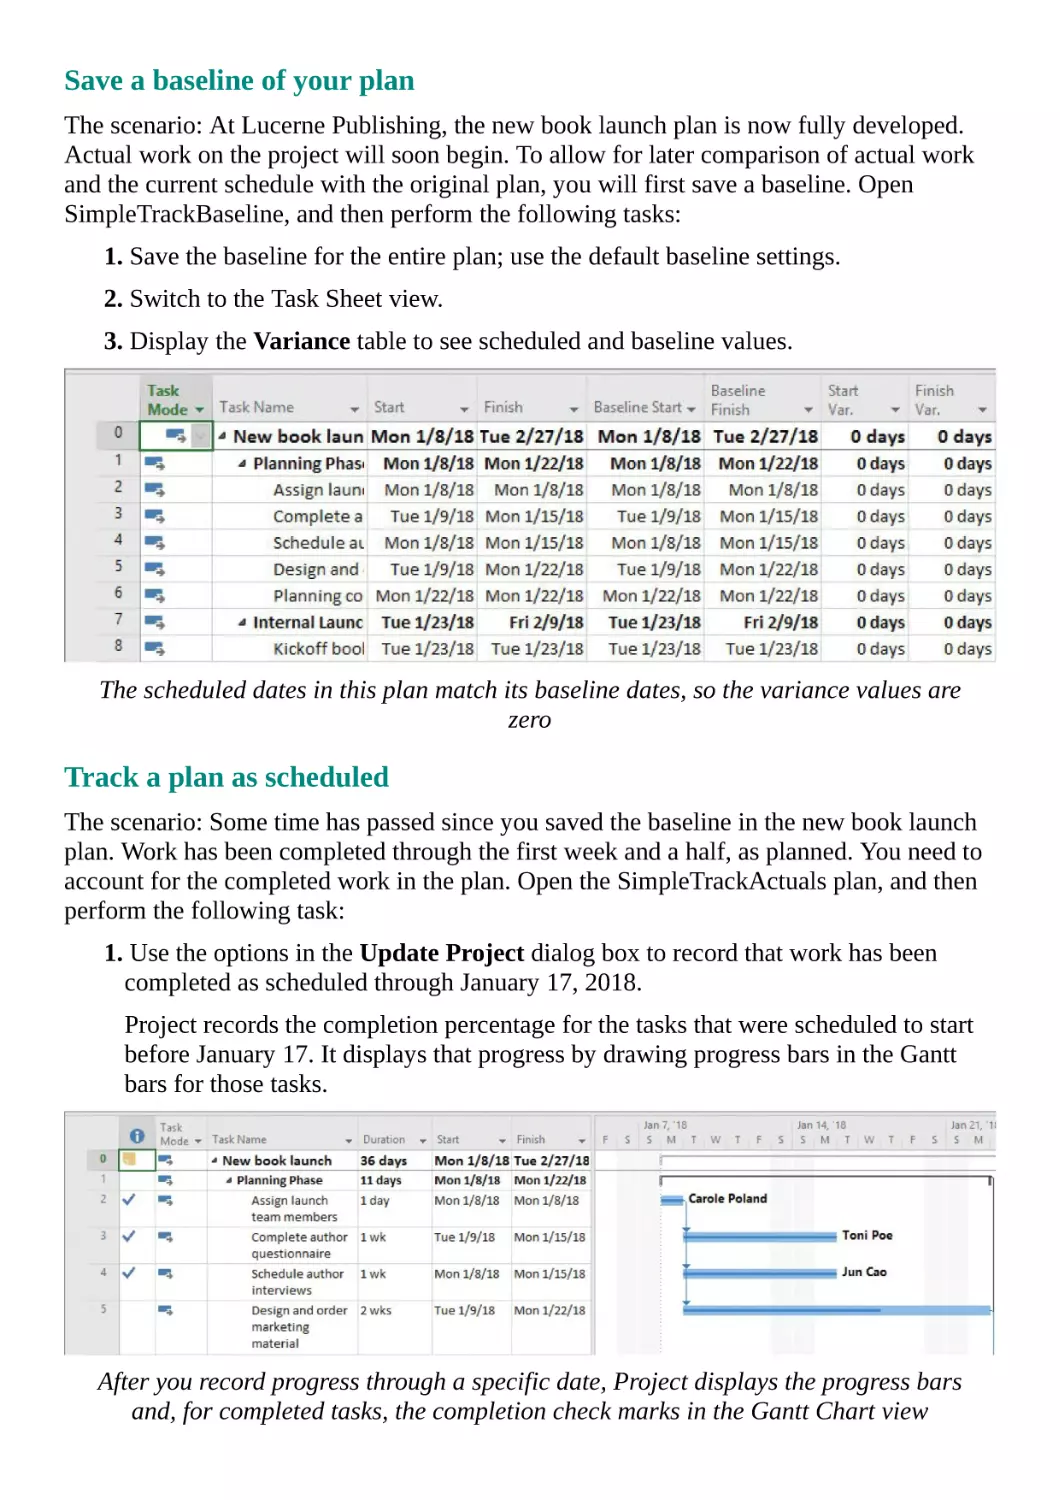 Save a baseline of your plan
Track a plan as scheduled